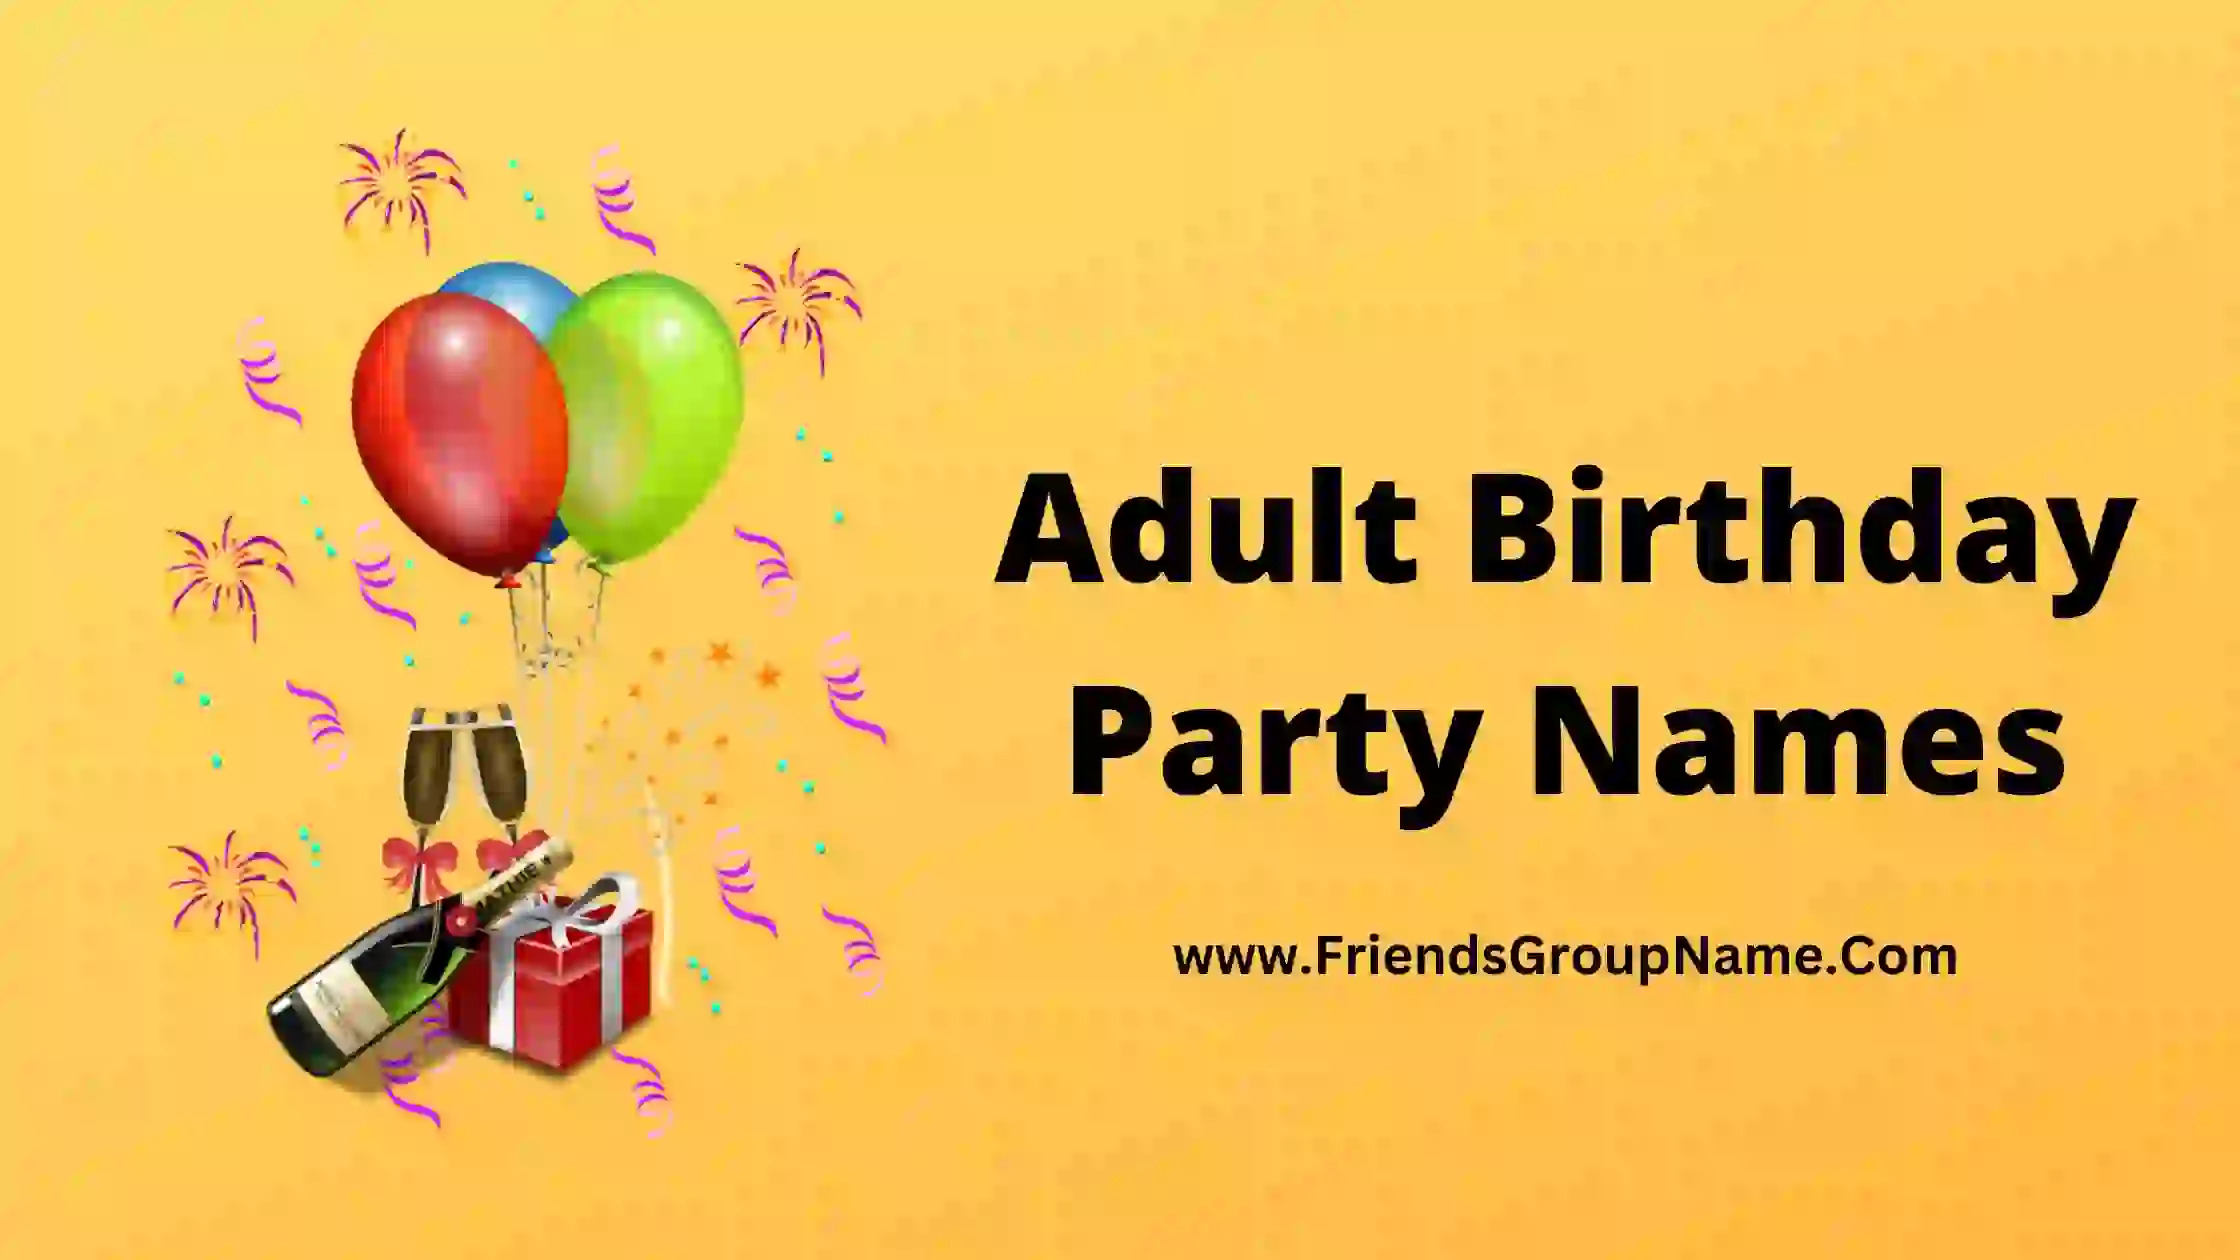 Adult Birthday Party Names